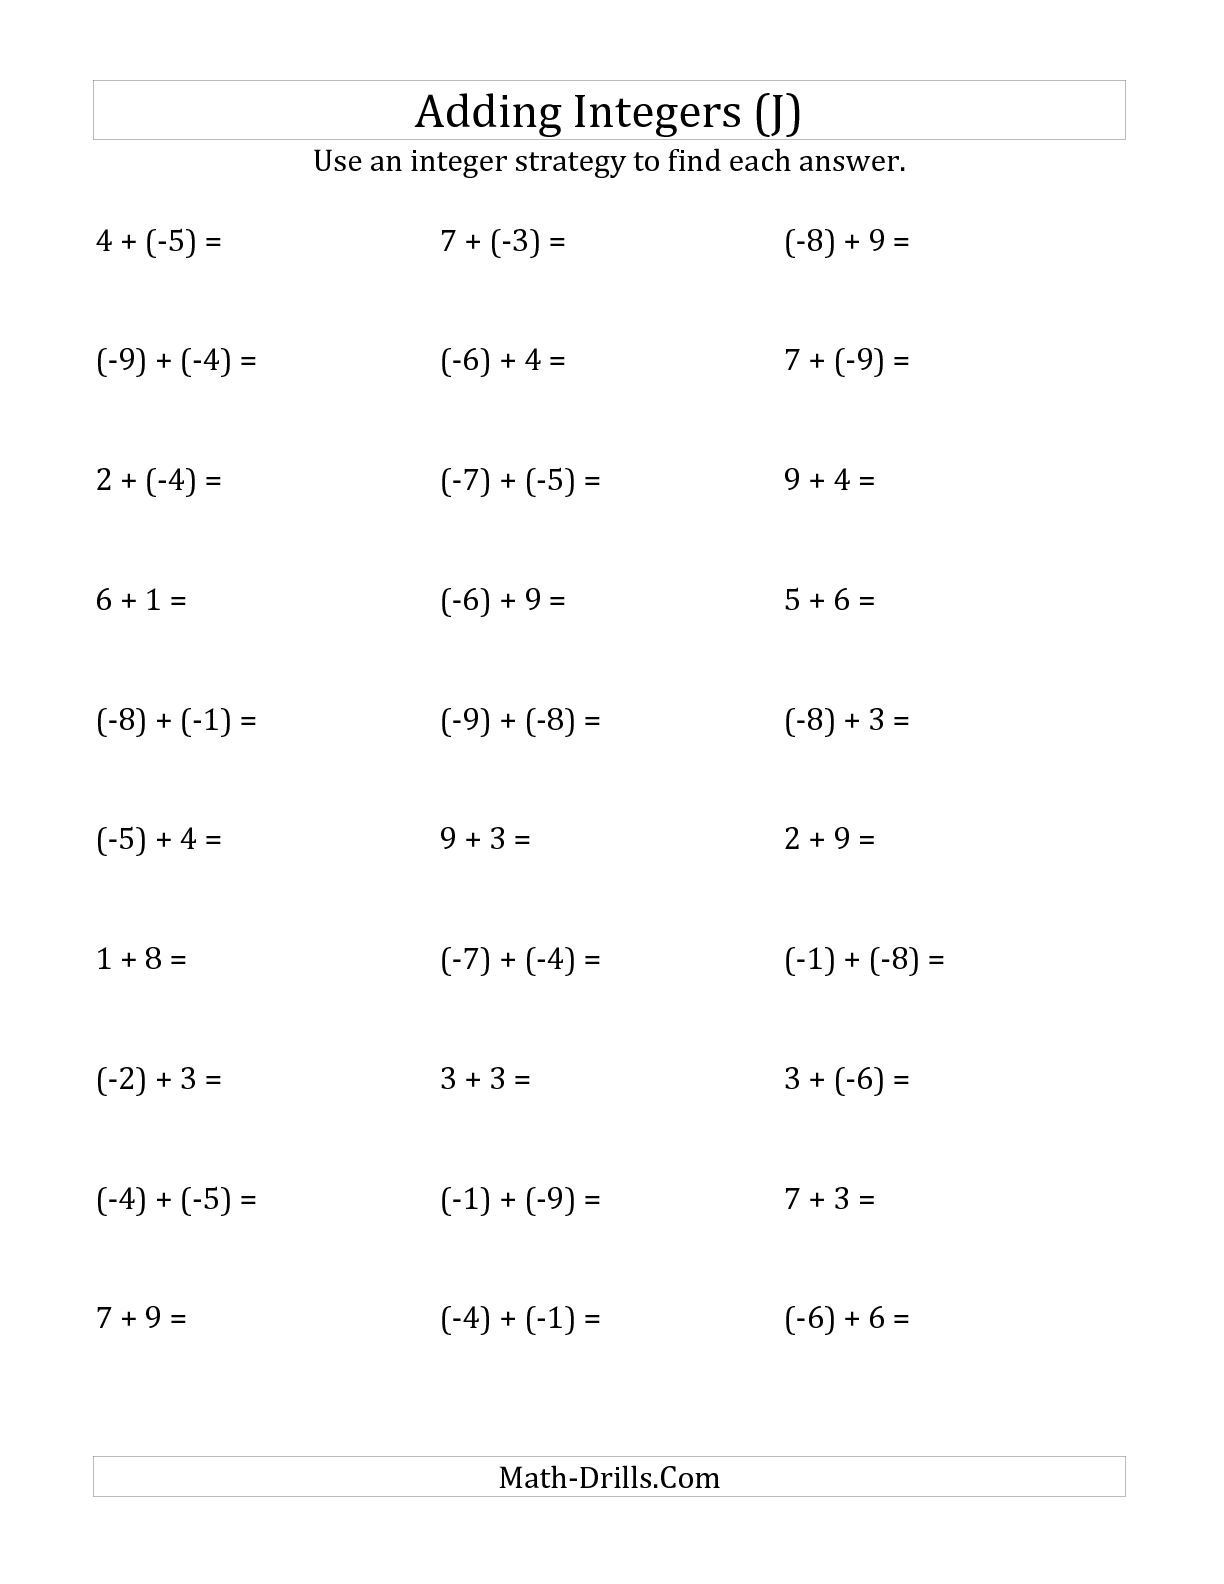 Multiplication Of Integers Worksheet the Adding Integers From 9 to 9 Negative Numbers In